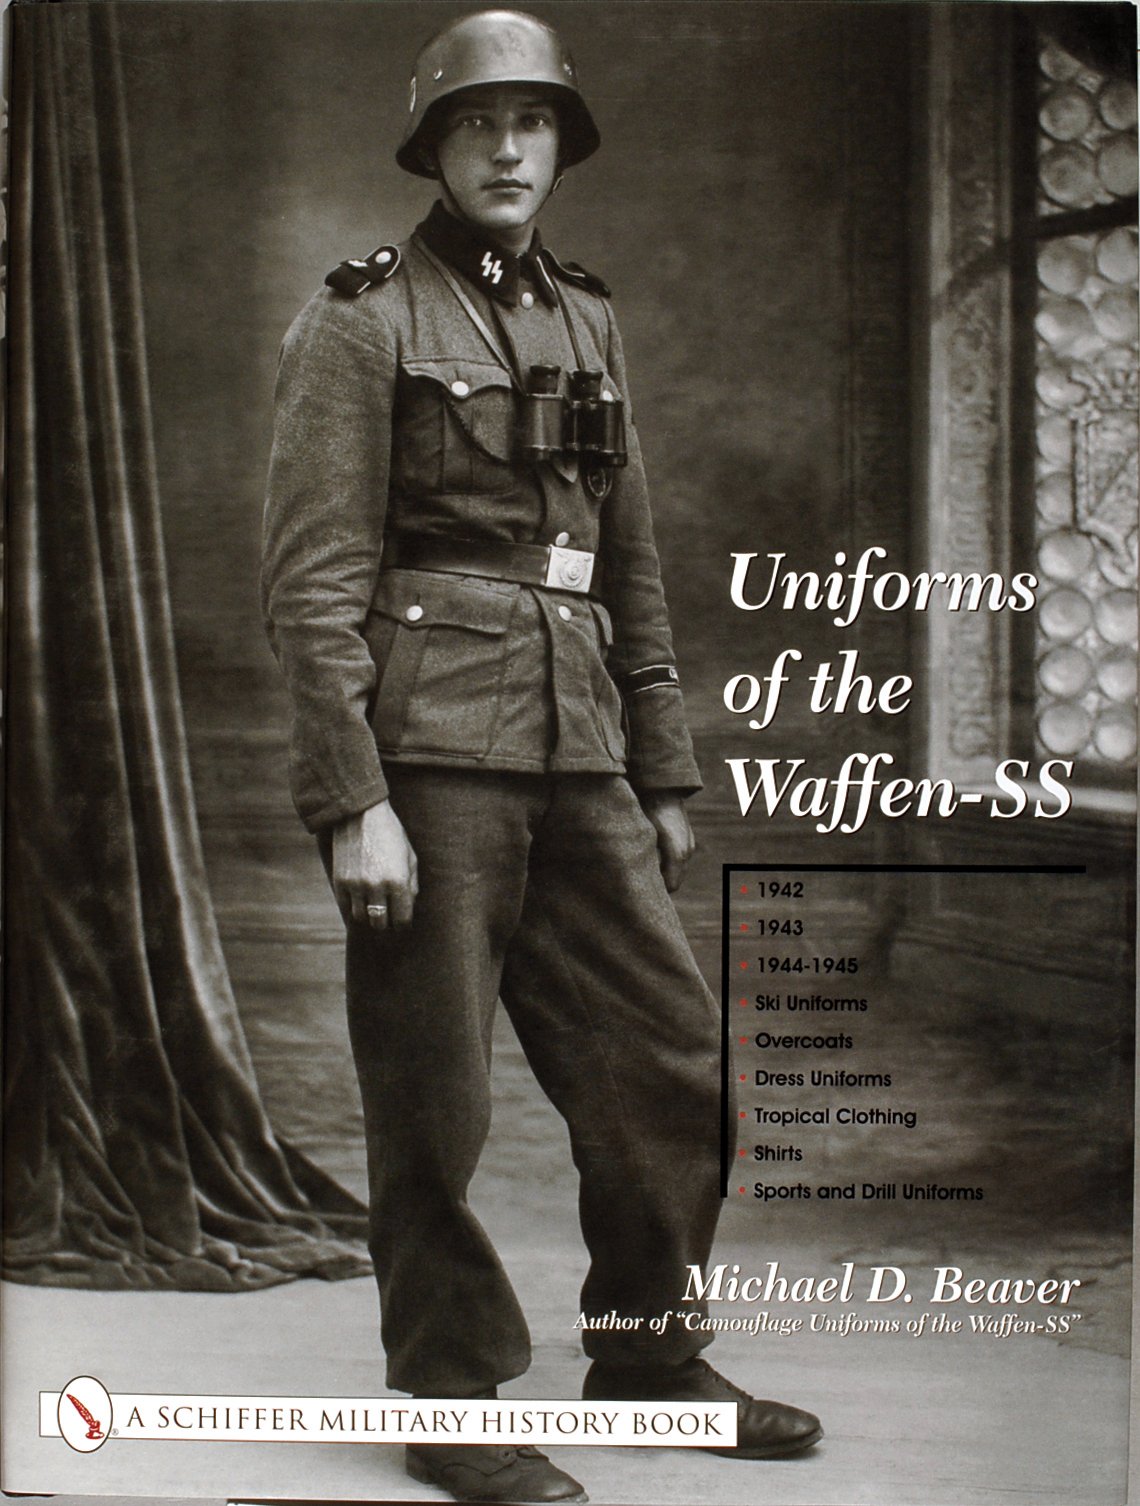 Uniforms of the Waffen-SS Vol. 2